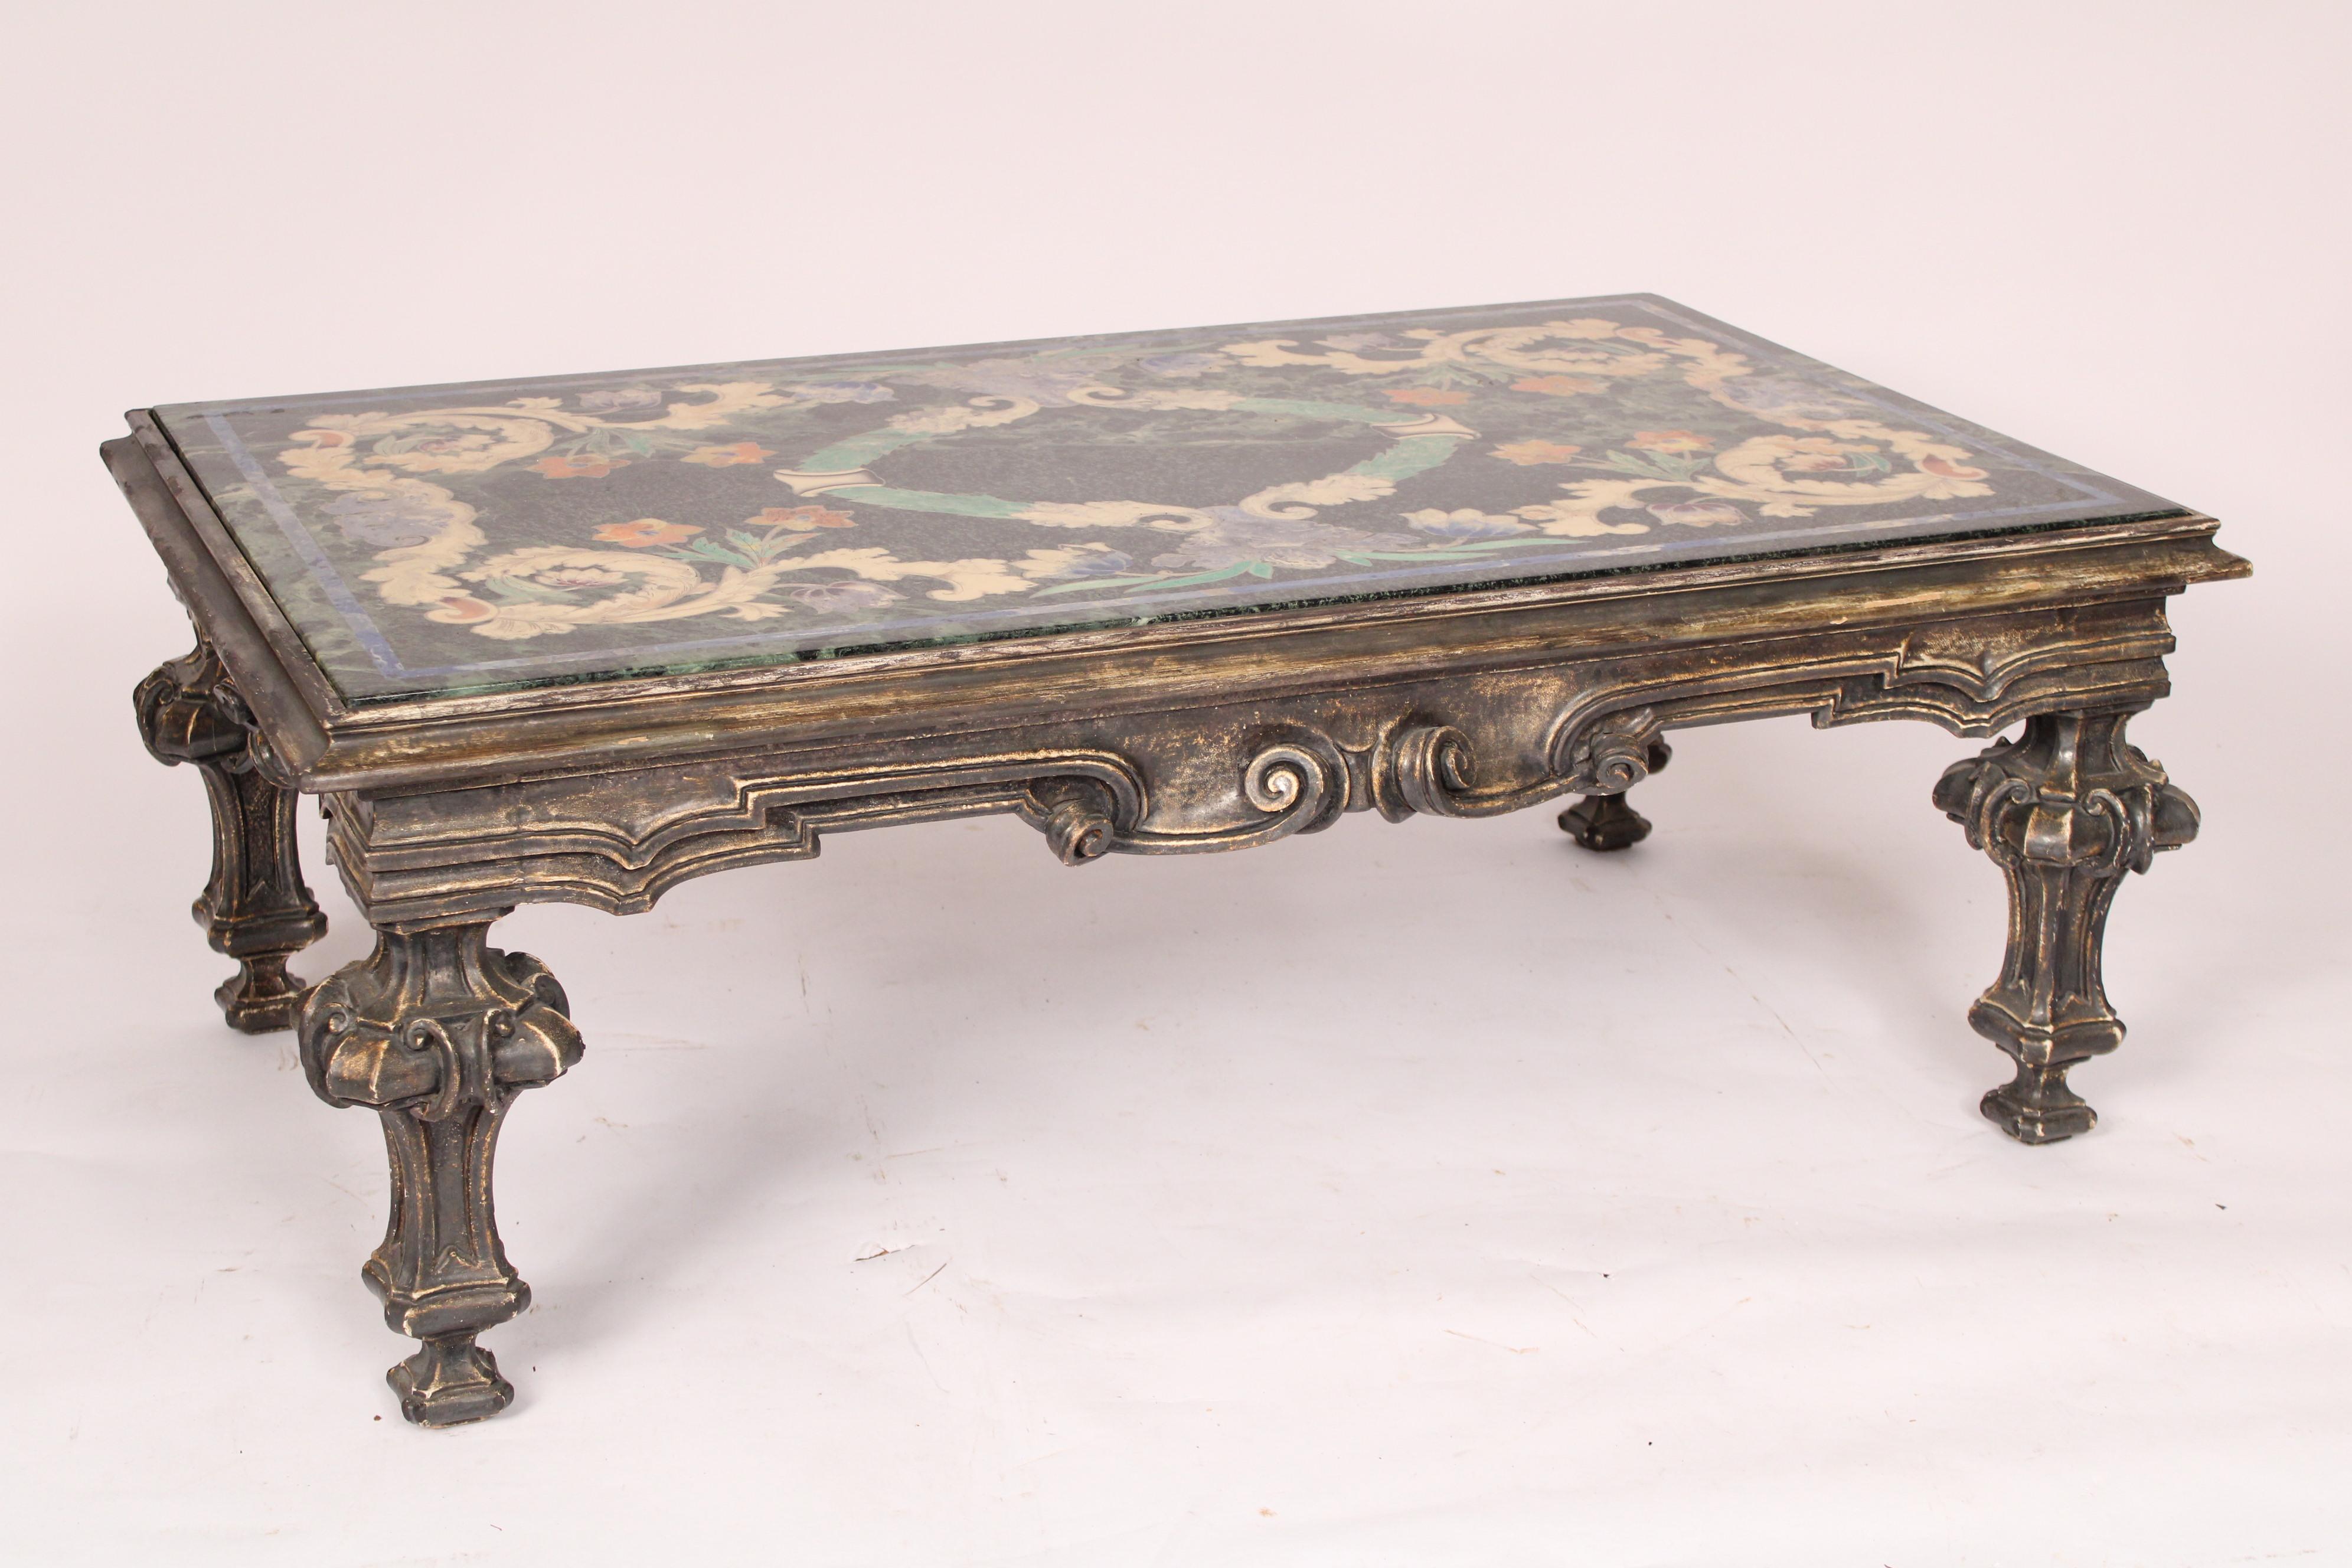 Italian Baroque Style Scagliola Decorated Marble Top Coffee Table